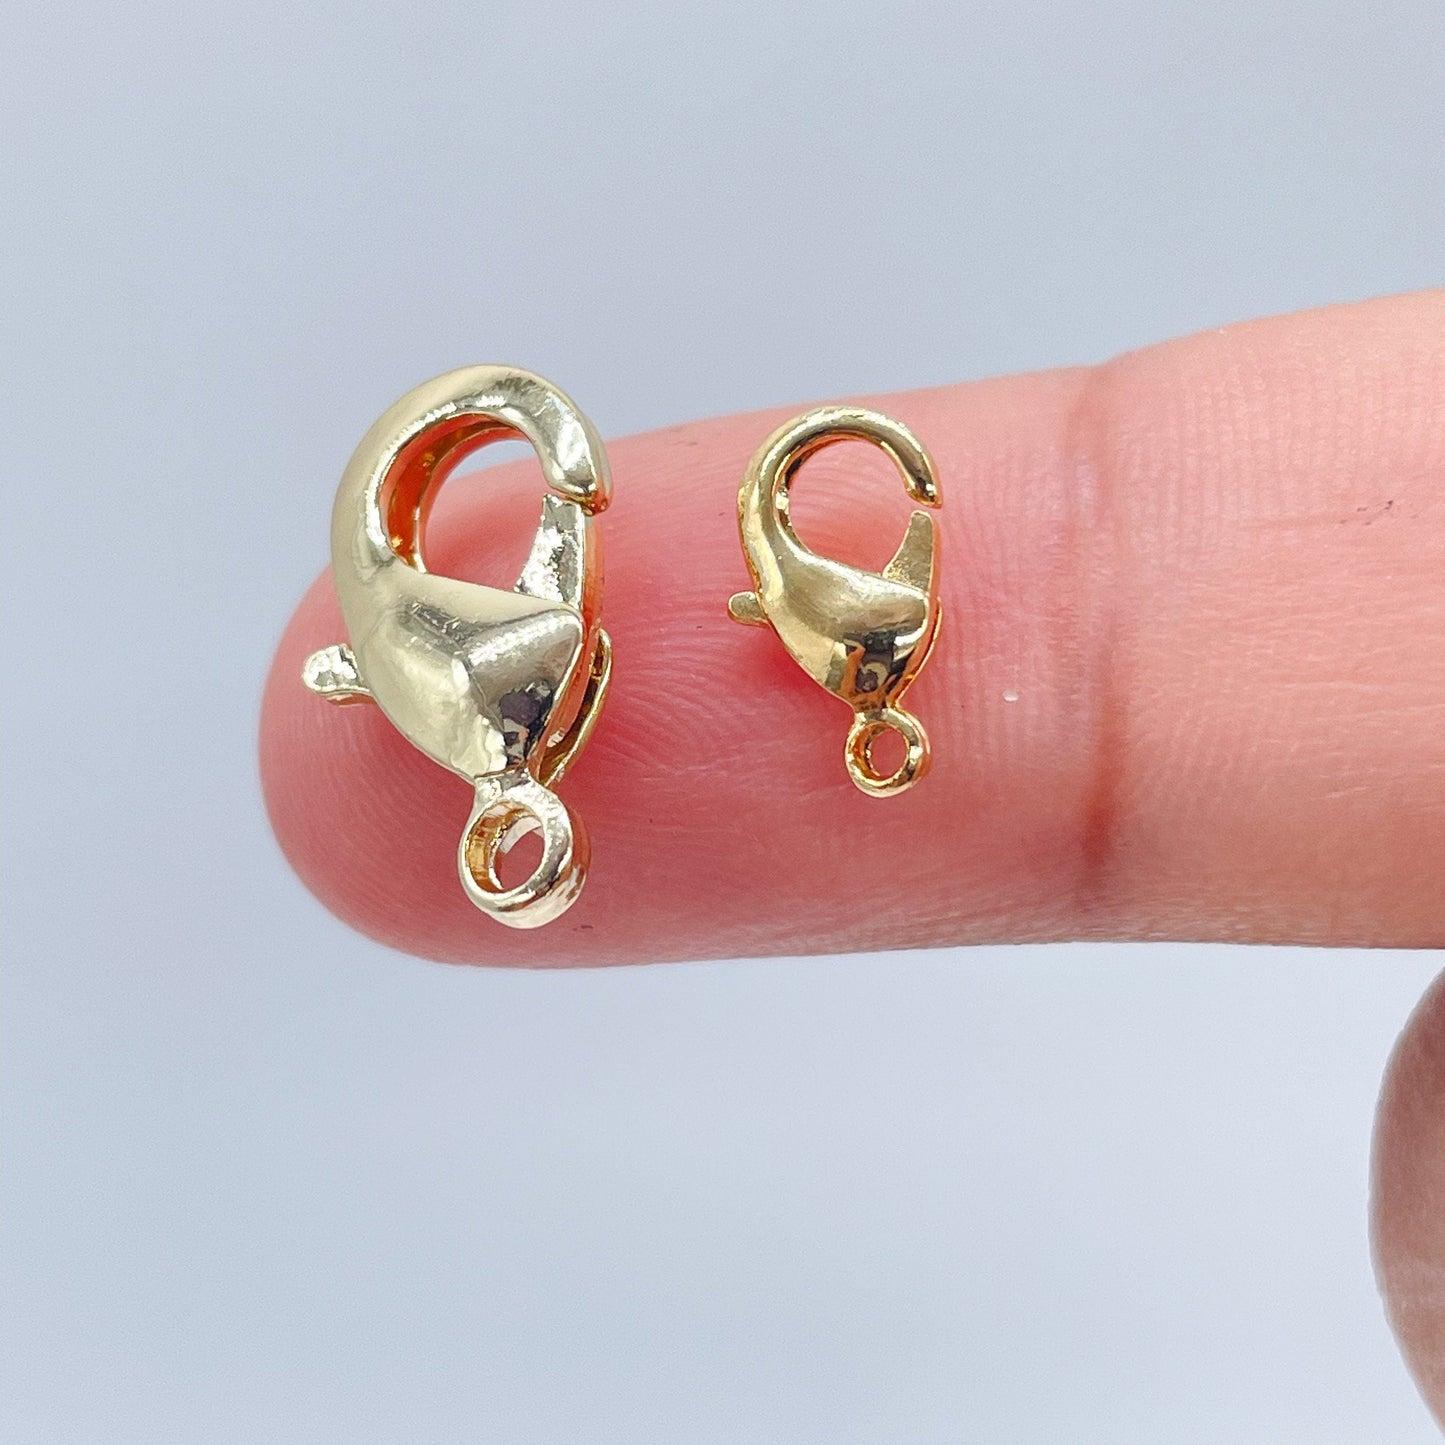 Package of 3 - 18k Gold Layered Lobster Claw Clasps For Chain, Necklace,